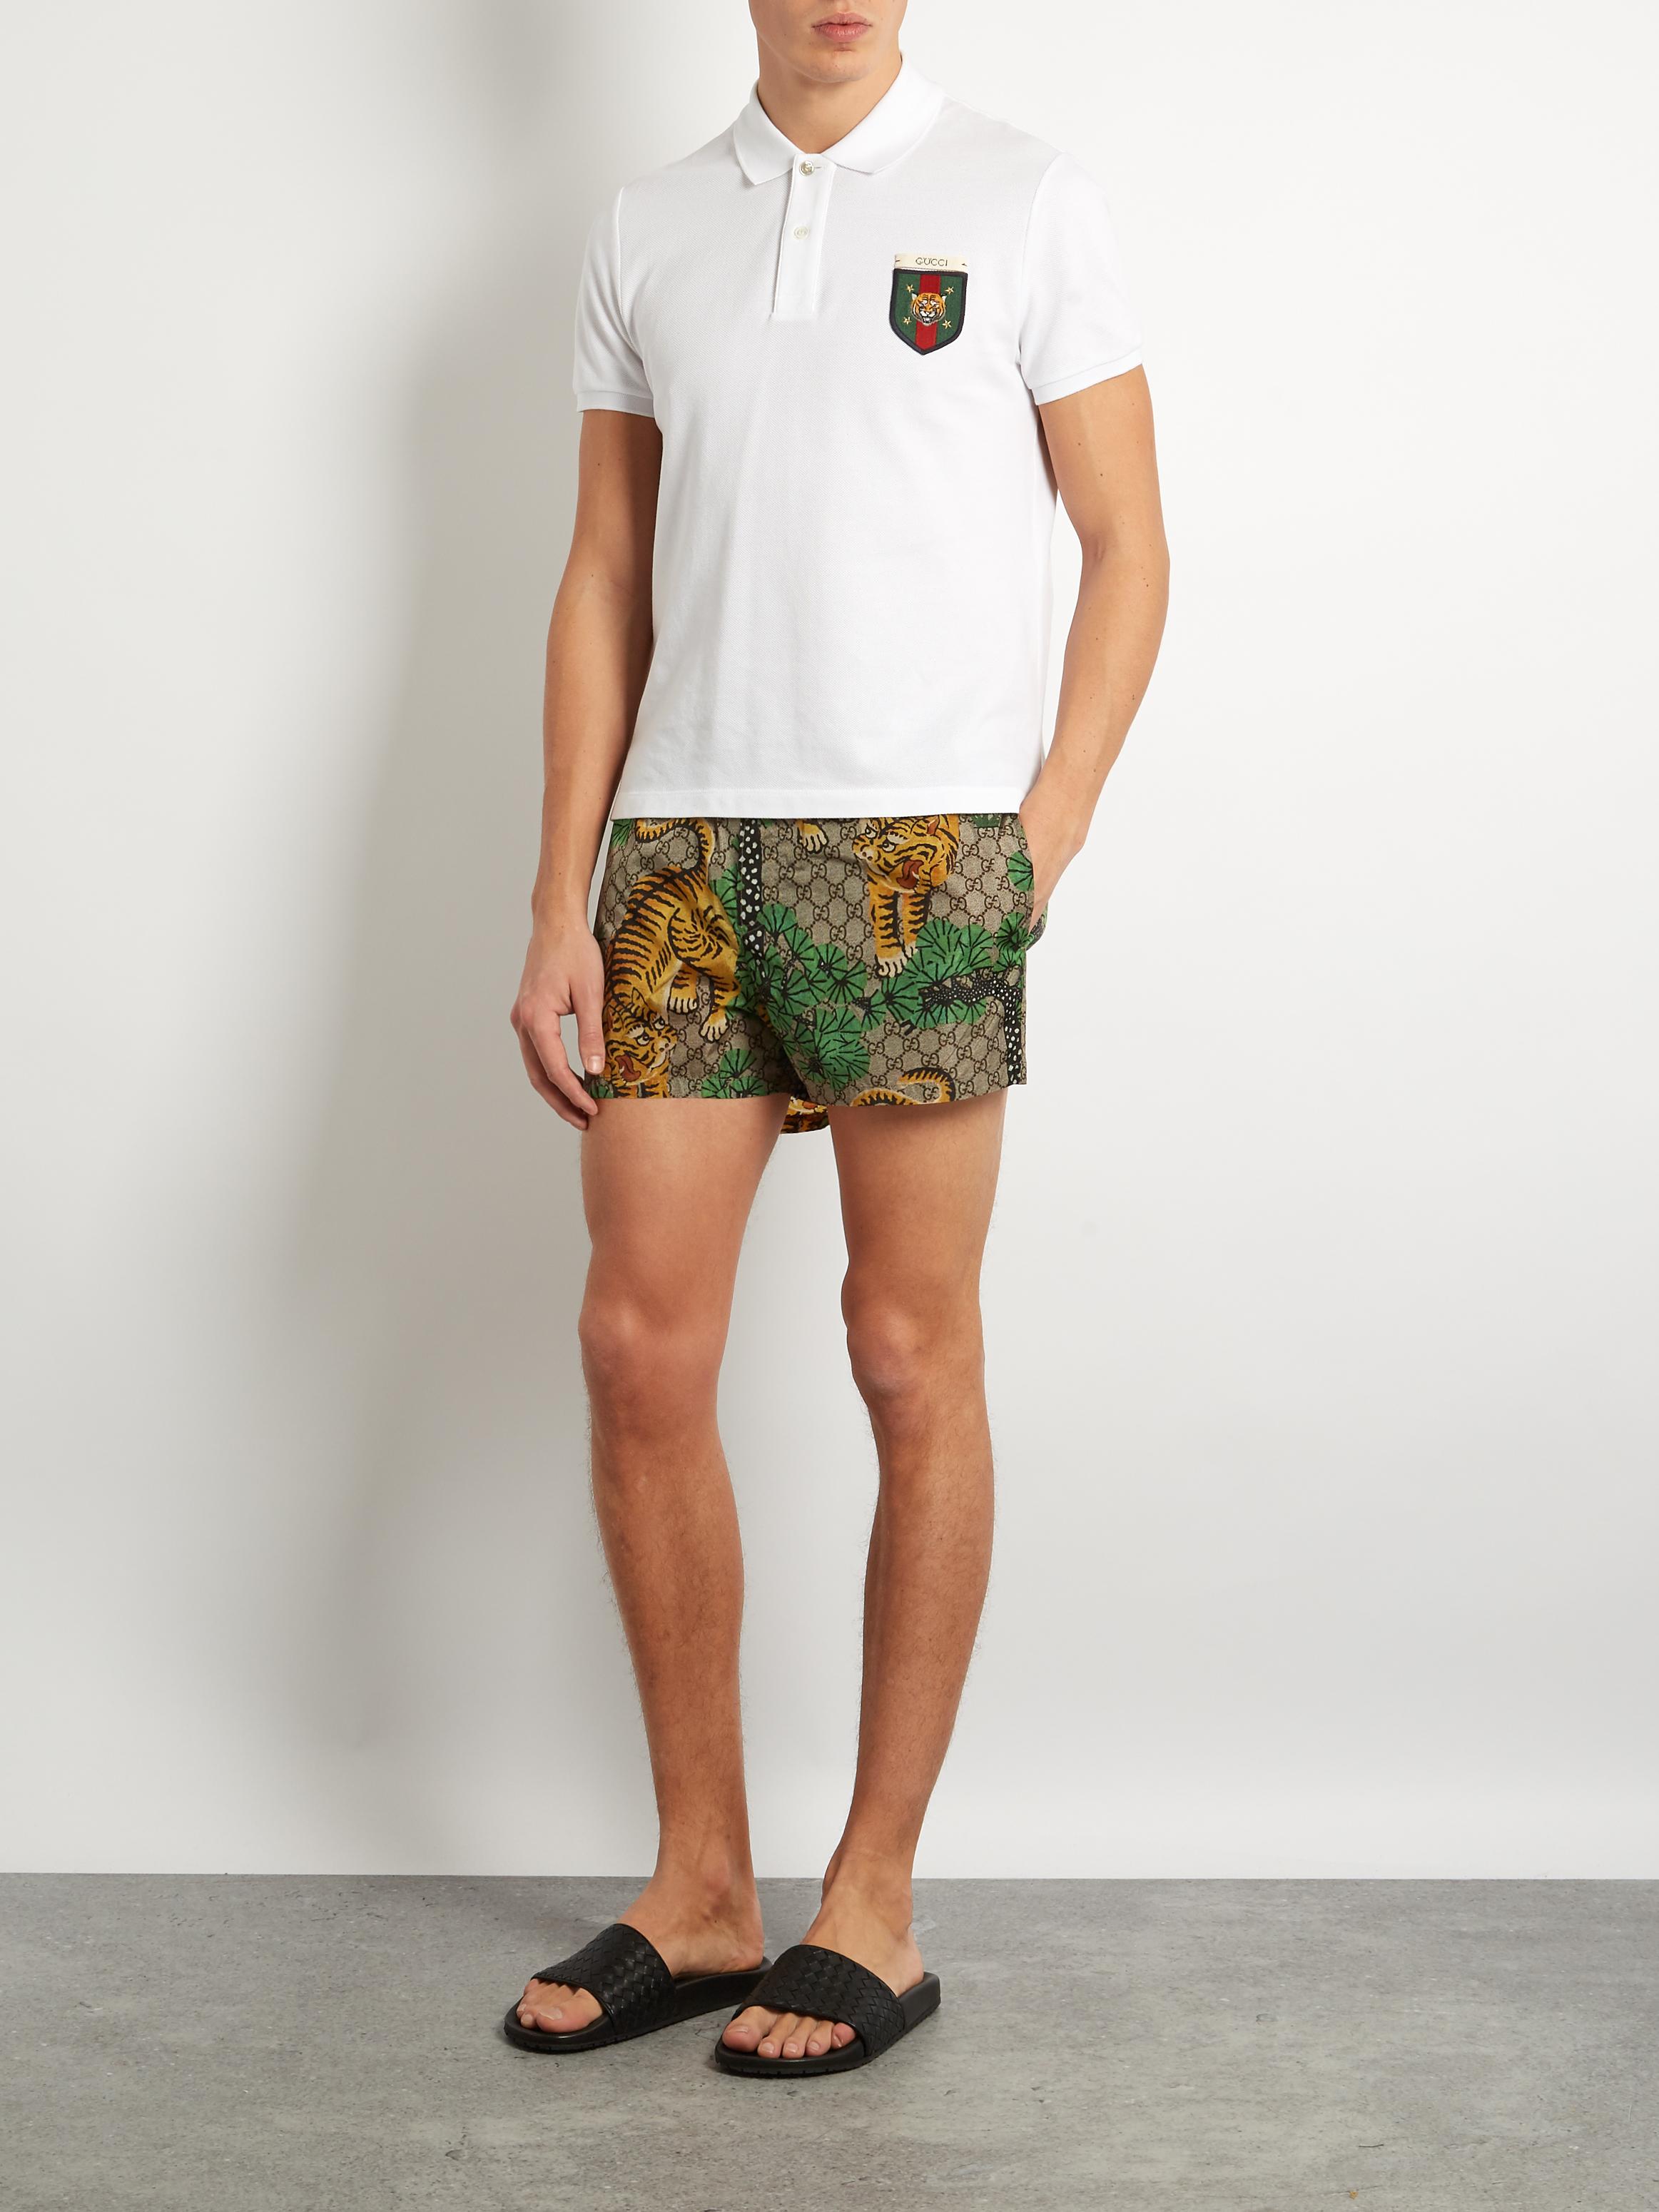 Gucci Synthetic Bengal-print Swim Shorts in Green for Men - Lyst